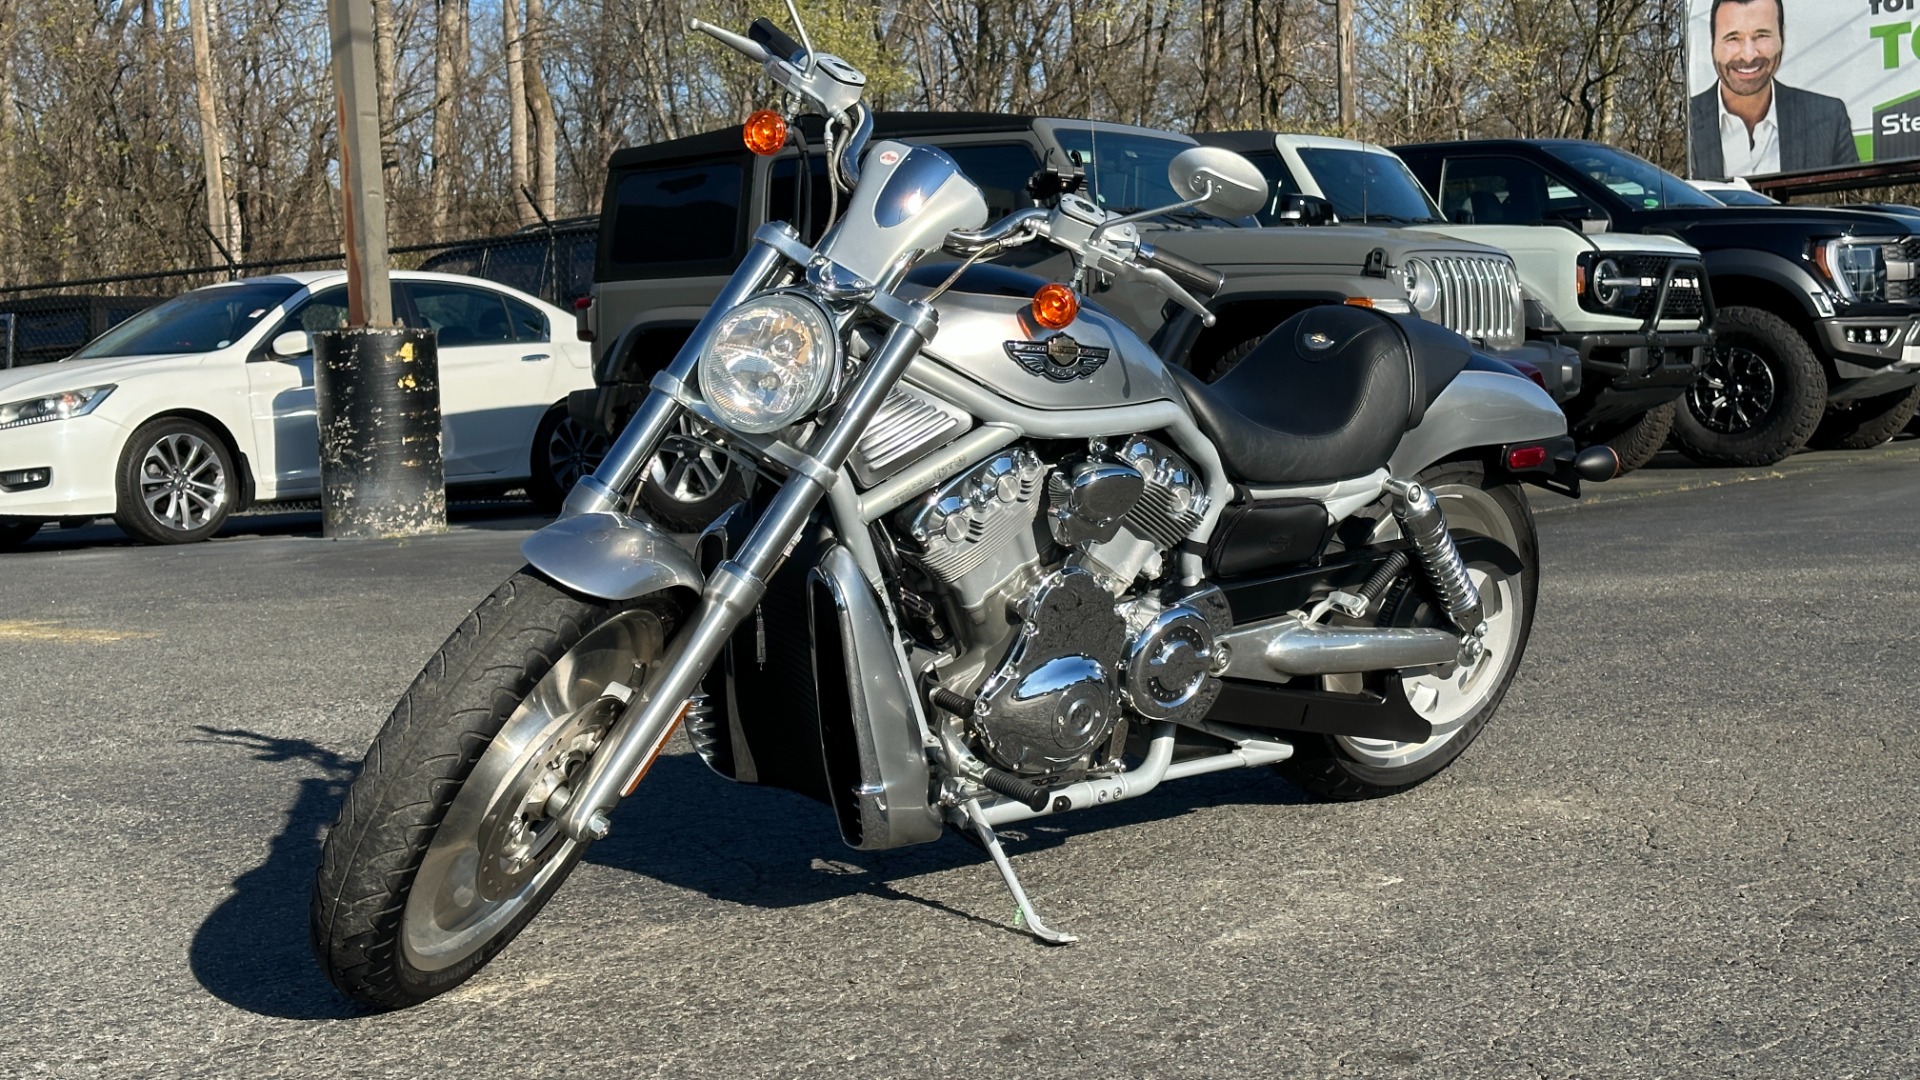 Used 2003 Harley Davidson V Rod ANNIVERSARY EDITION / 1130CC ENGINE / BREMBO BRAKES / VORTEX AIR SCOOPS for sale $7,695 at Formula Imports in Charlotte NC 28227 55